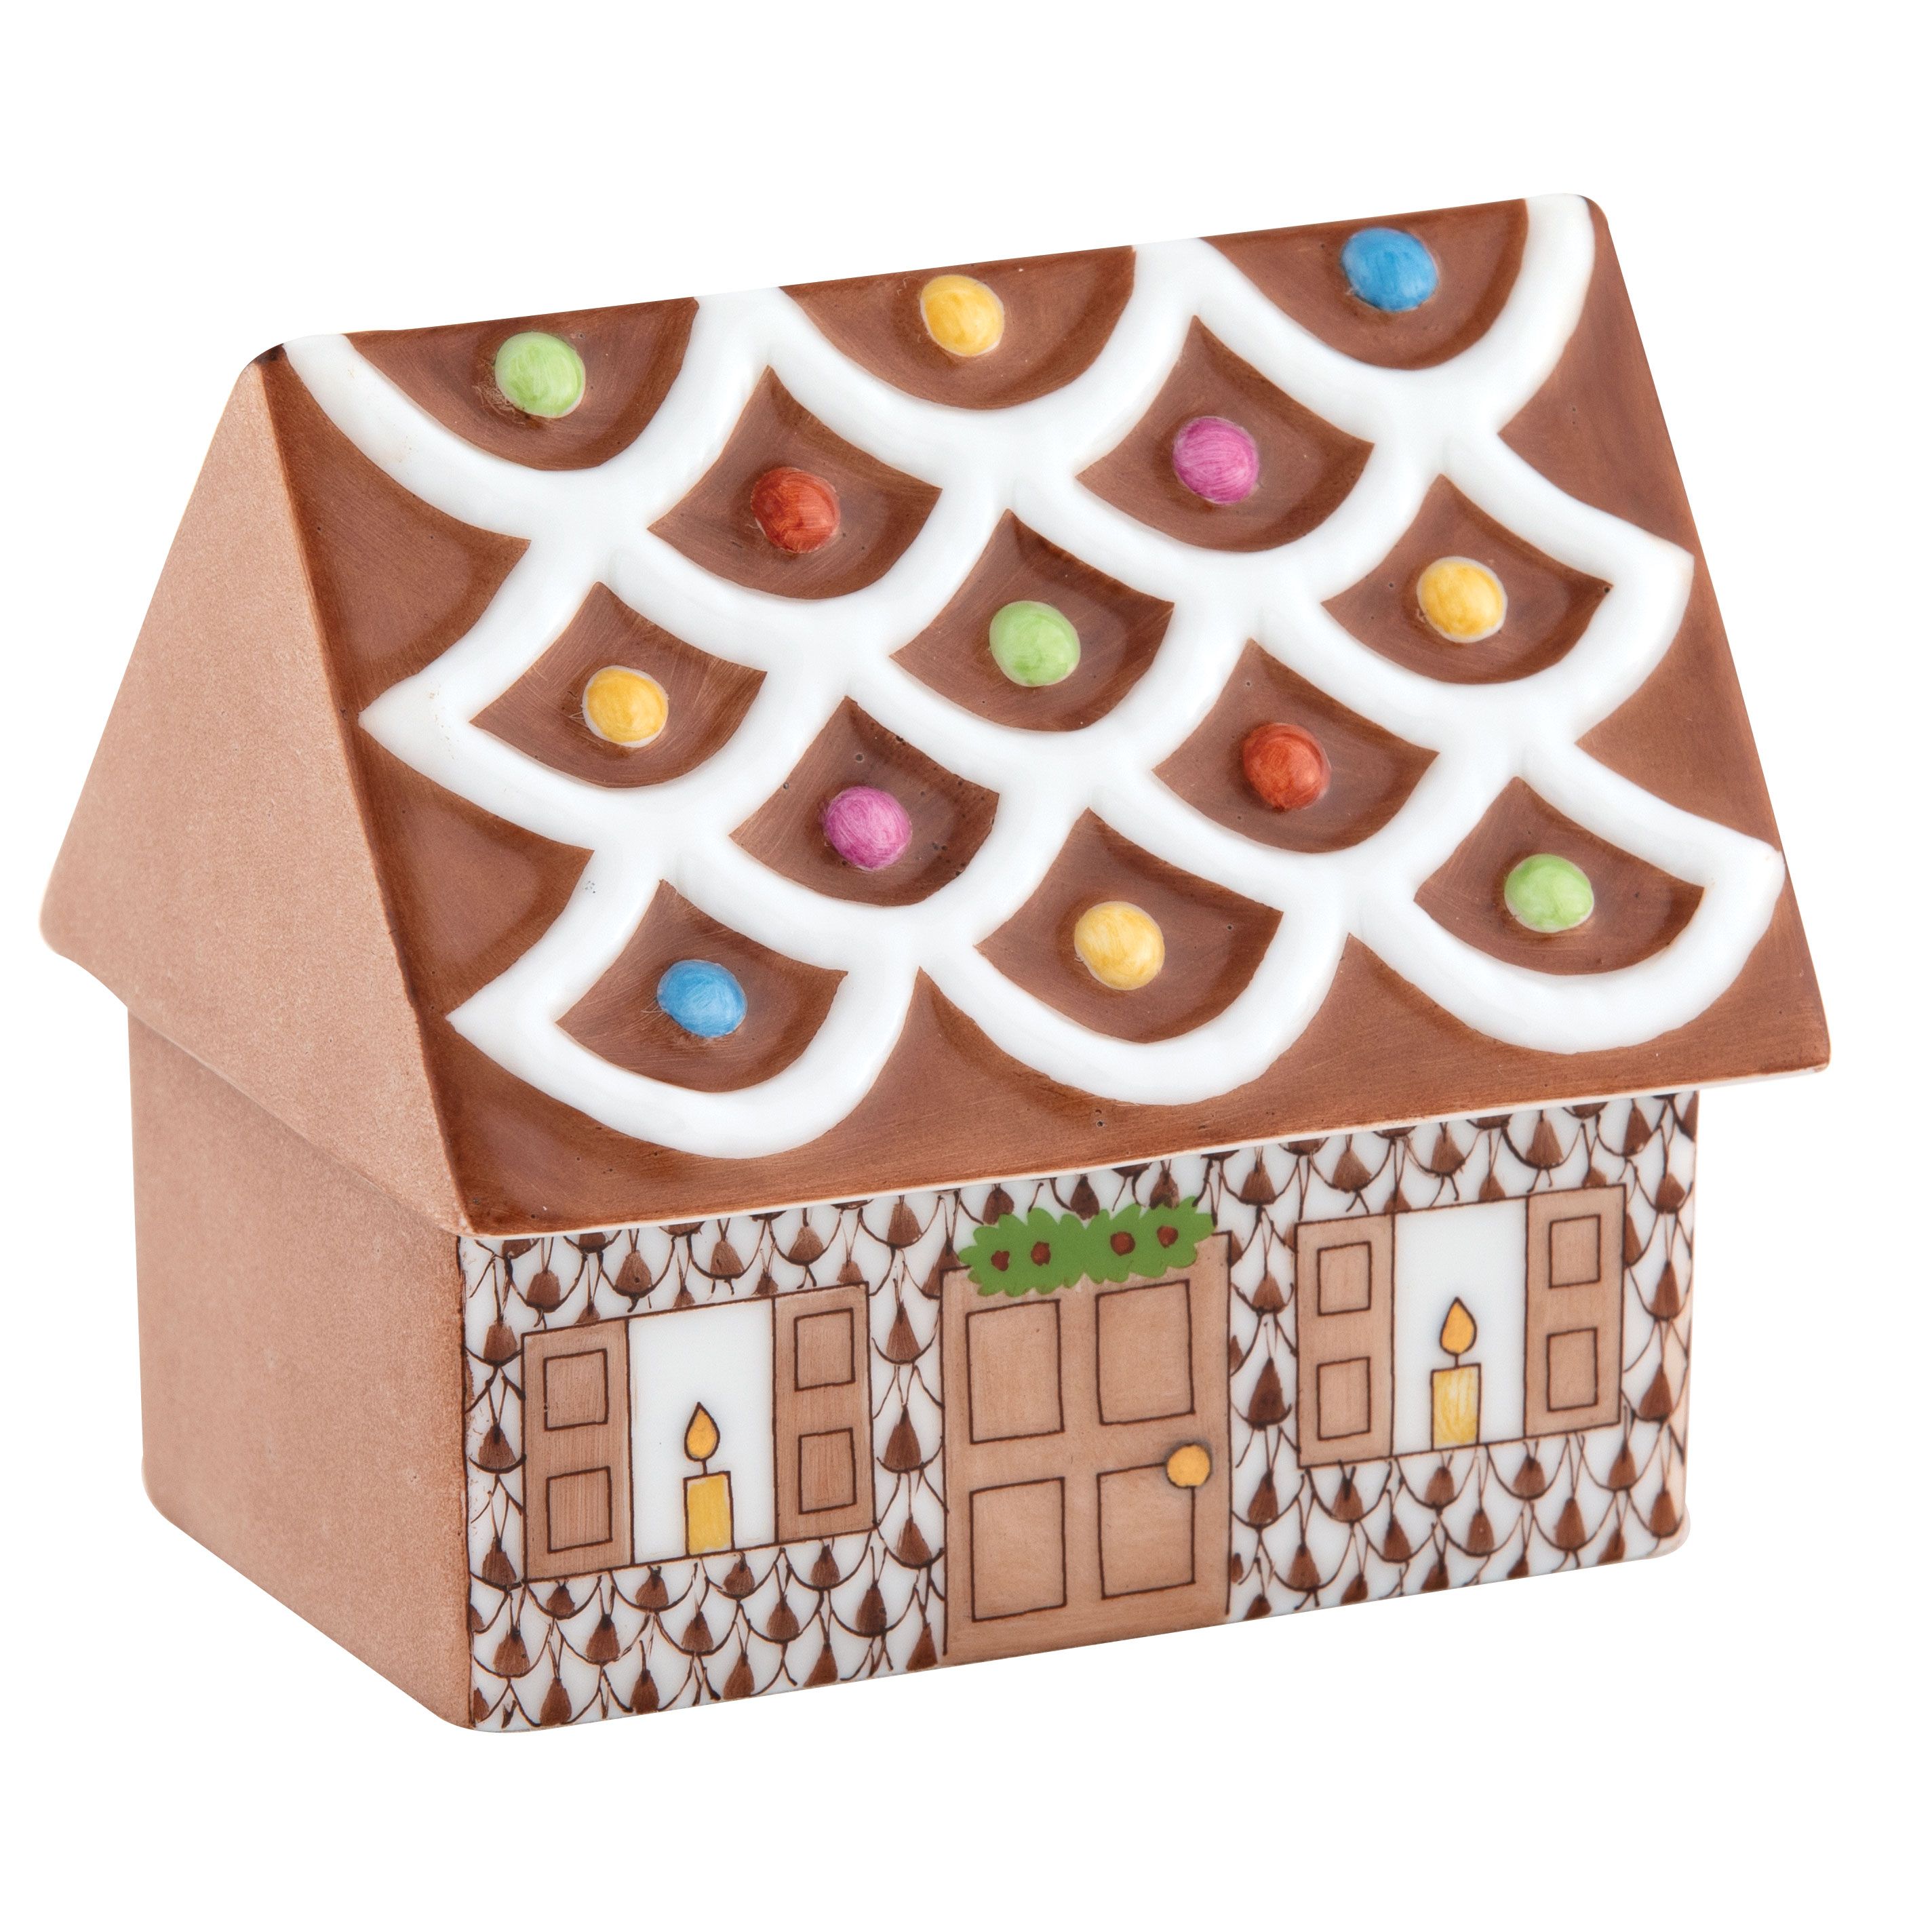 Cozy Gingerbread House- Chocolate